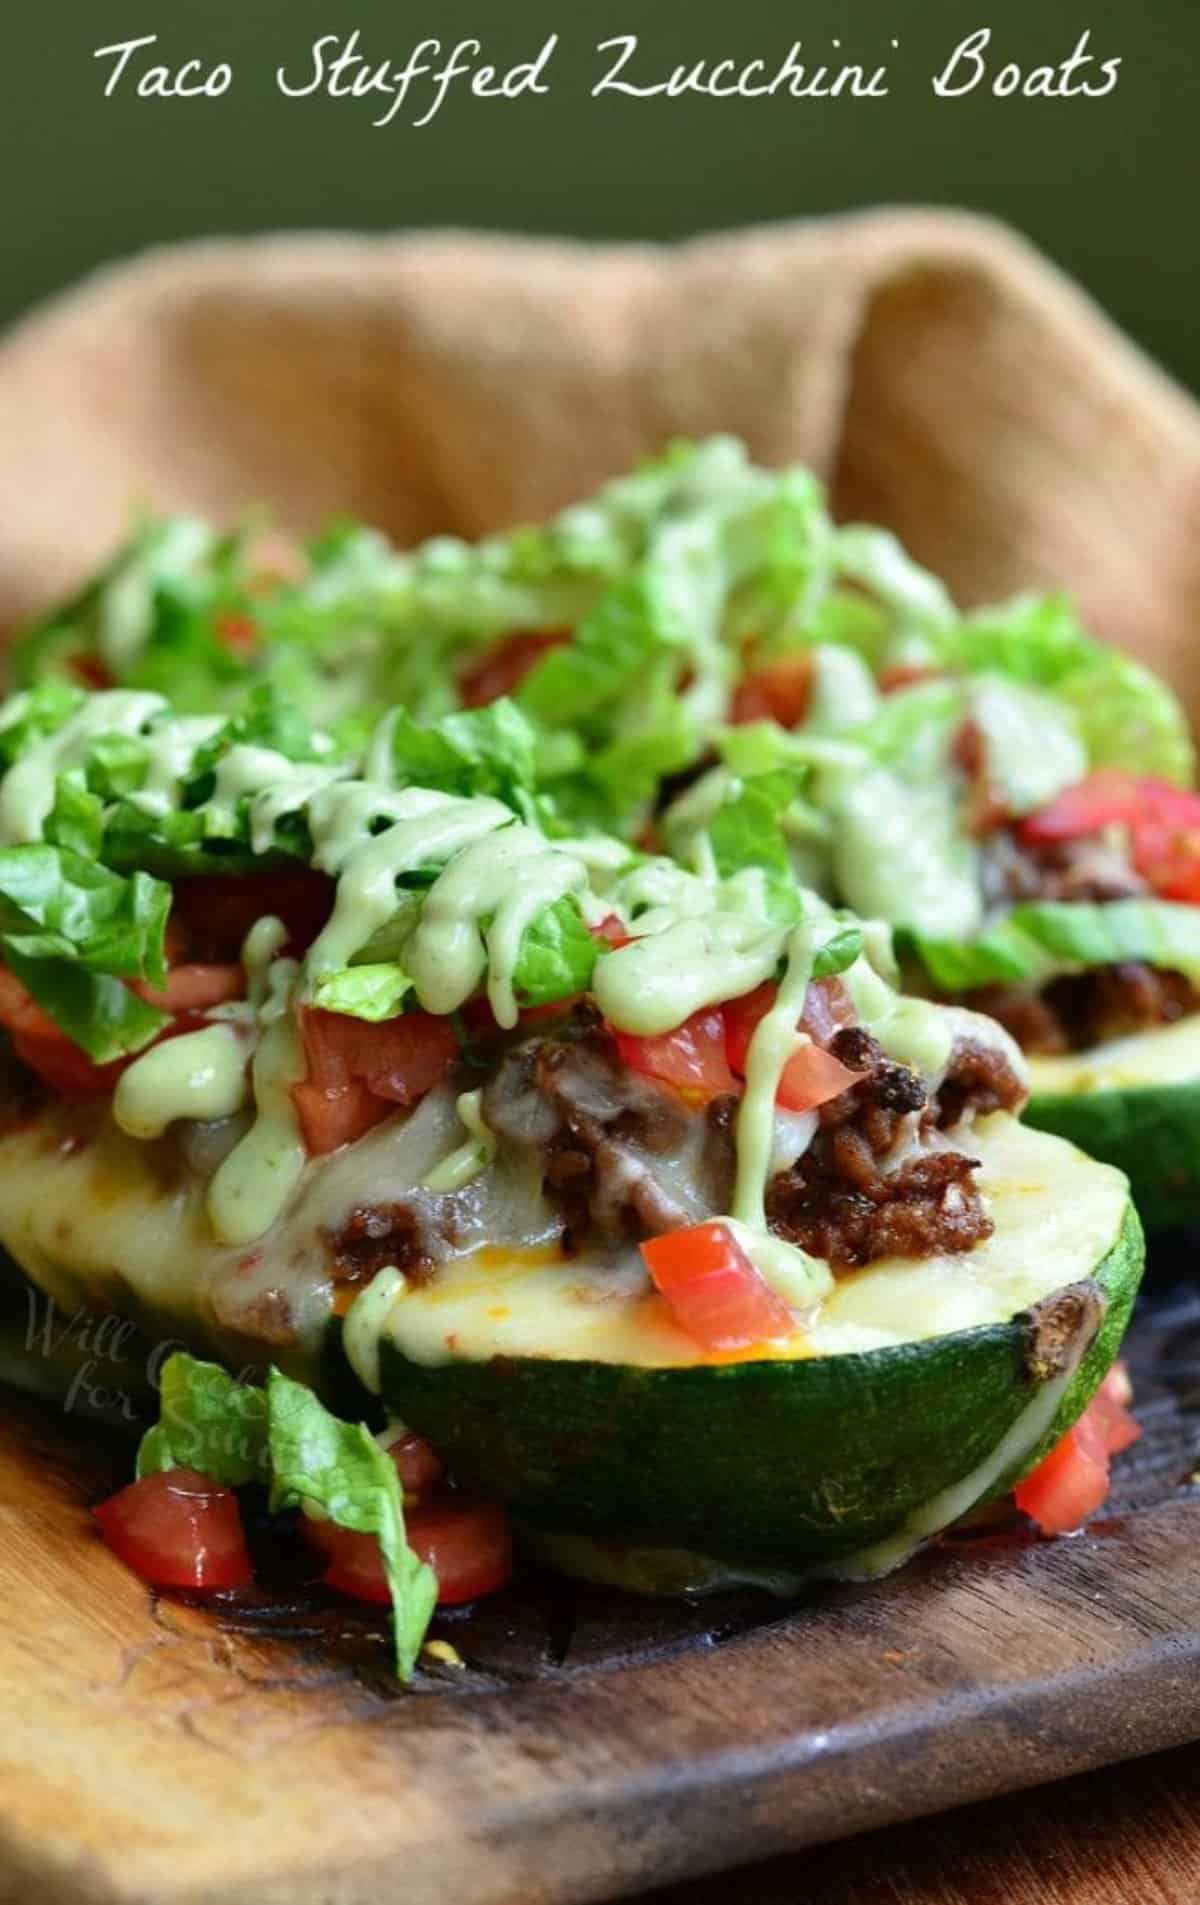 large zucchini boat stuffed with beef and topped with lettuce, tomatoes, and dressing.